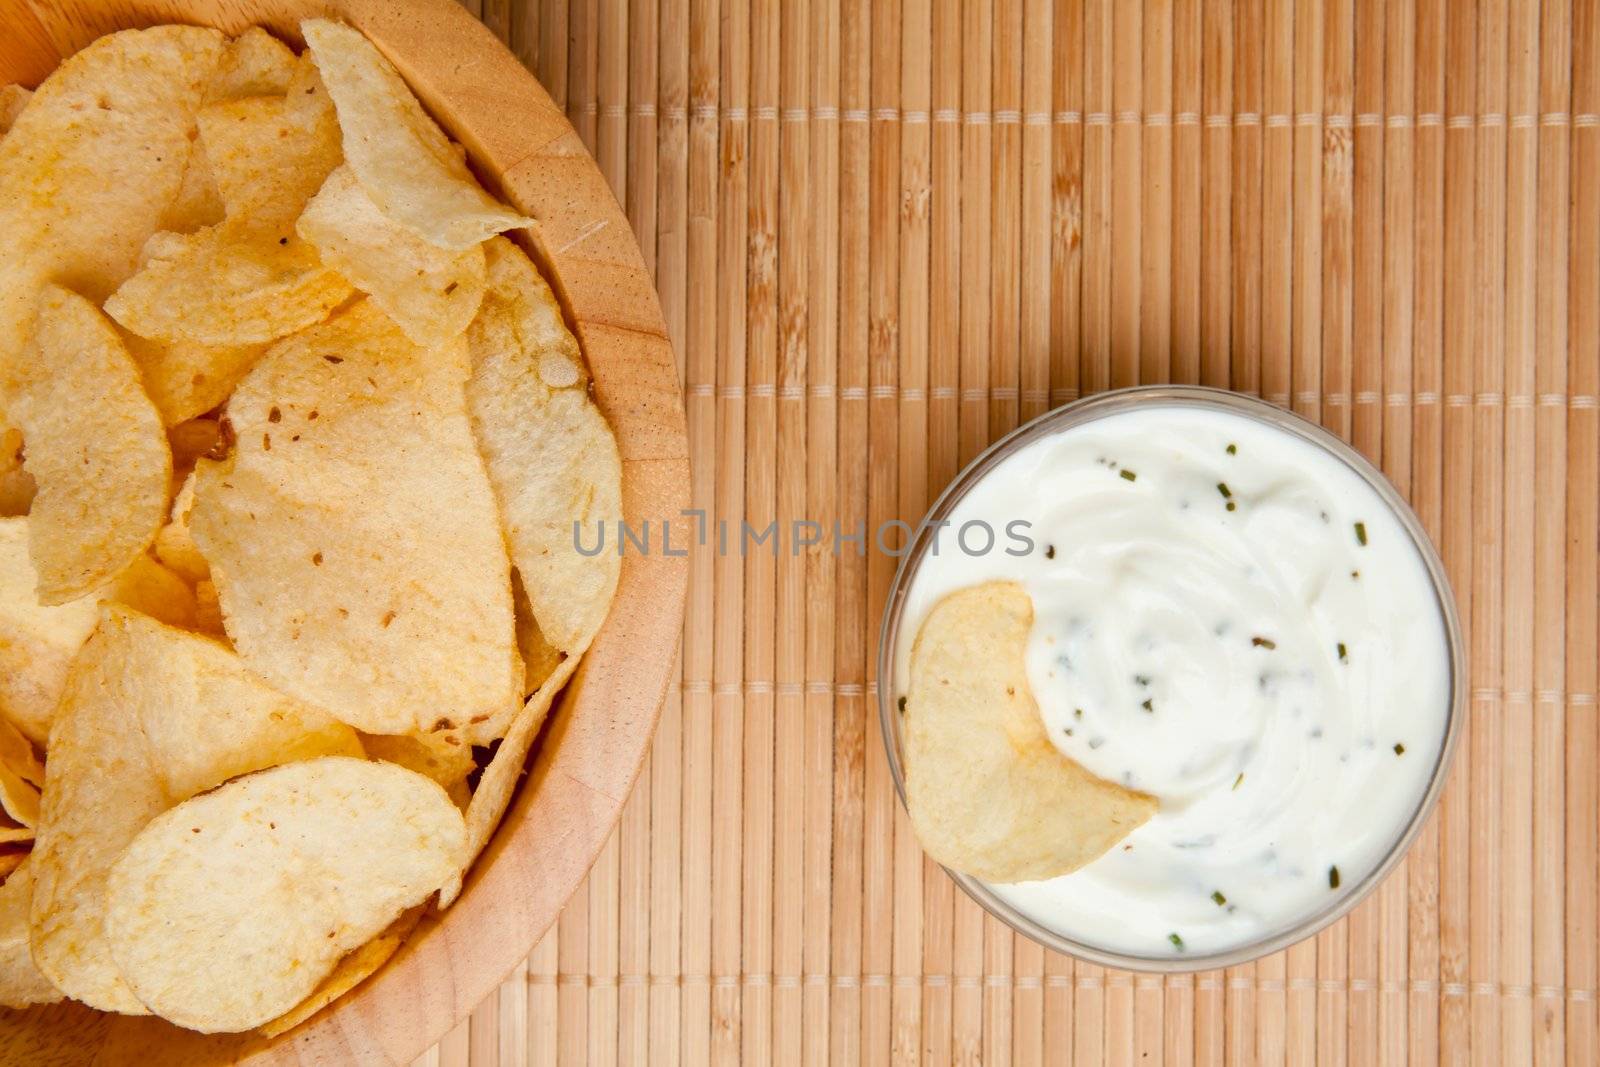 A bowl of chips and a bowl of dip side by side by Wavebreakmedia